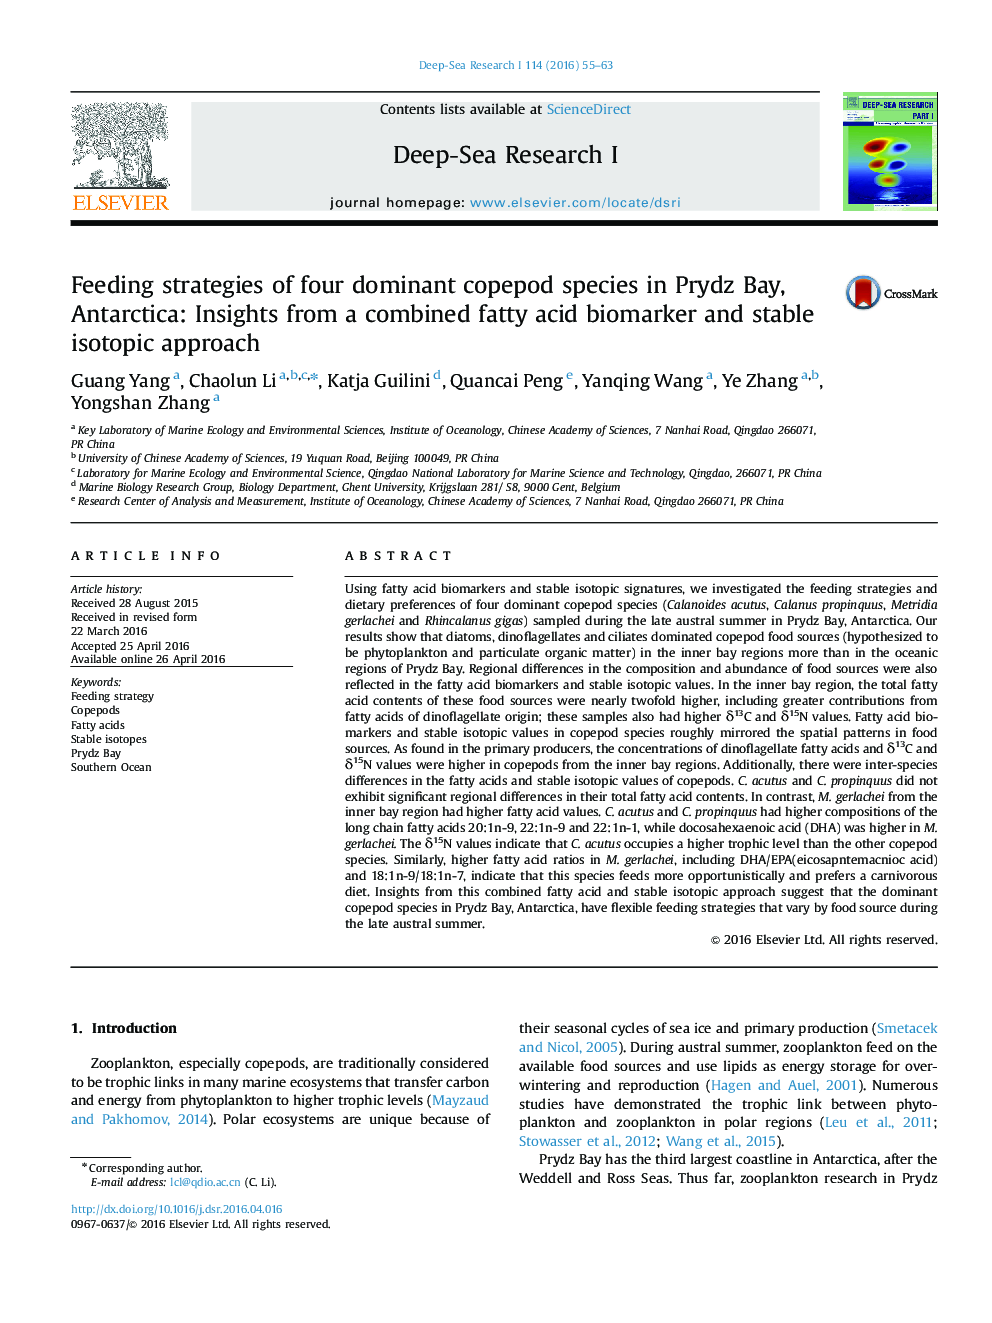 Feeding strategies of four dominant copepod species in Prydz Bay, Antarctica: Insights from a combined fatty acid biomarker and stable isotopic approach